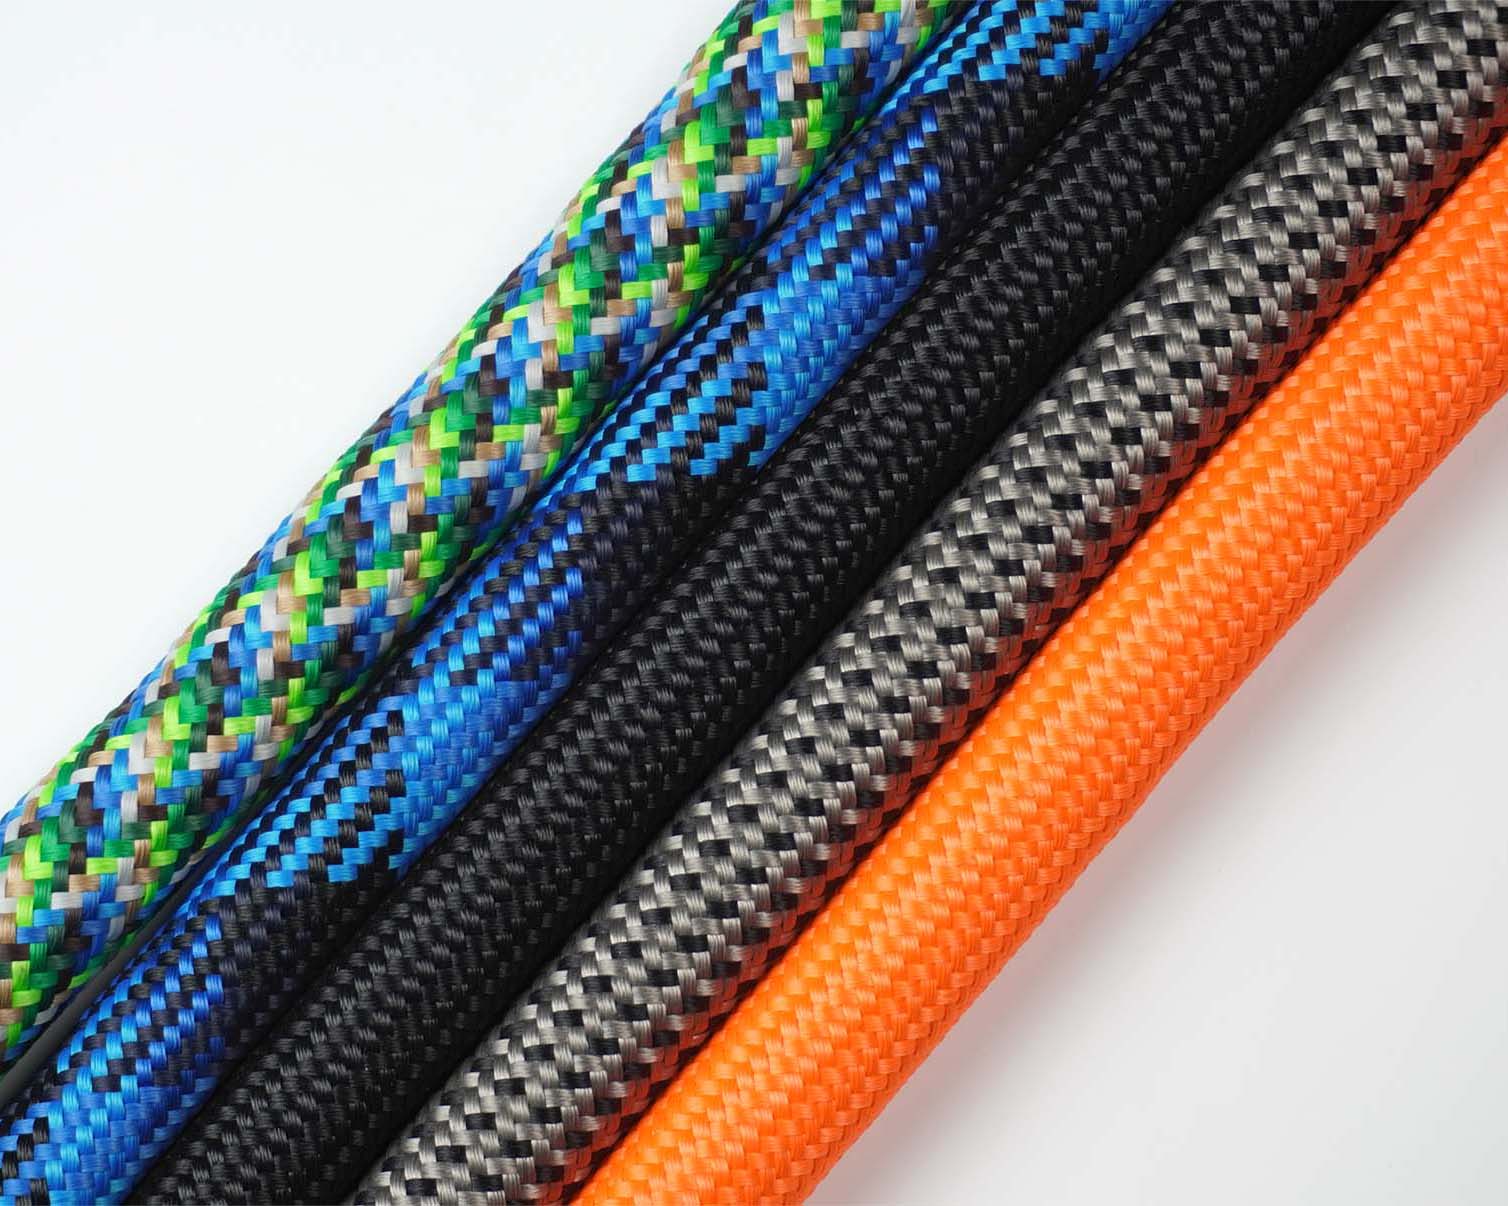 tex–lock textile ropes in 5 colour patterns